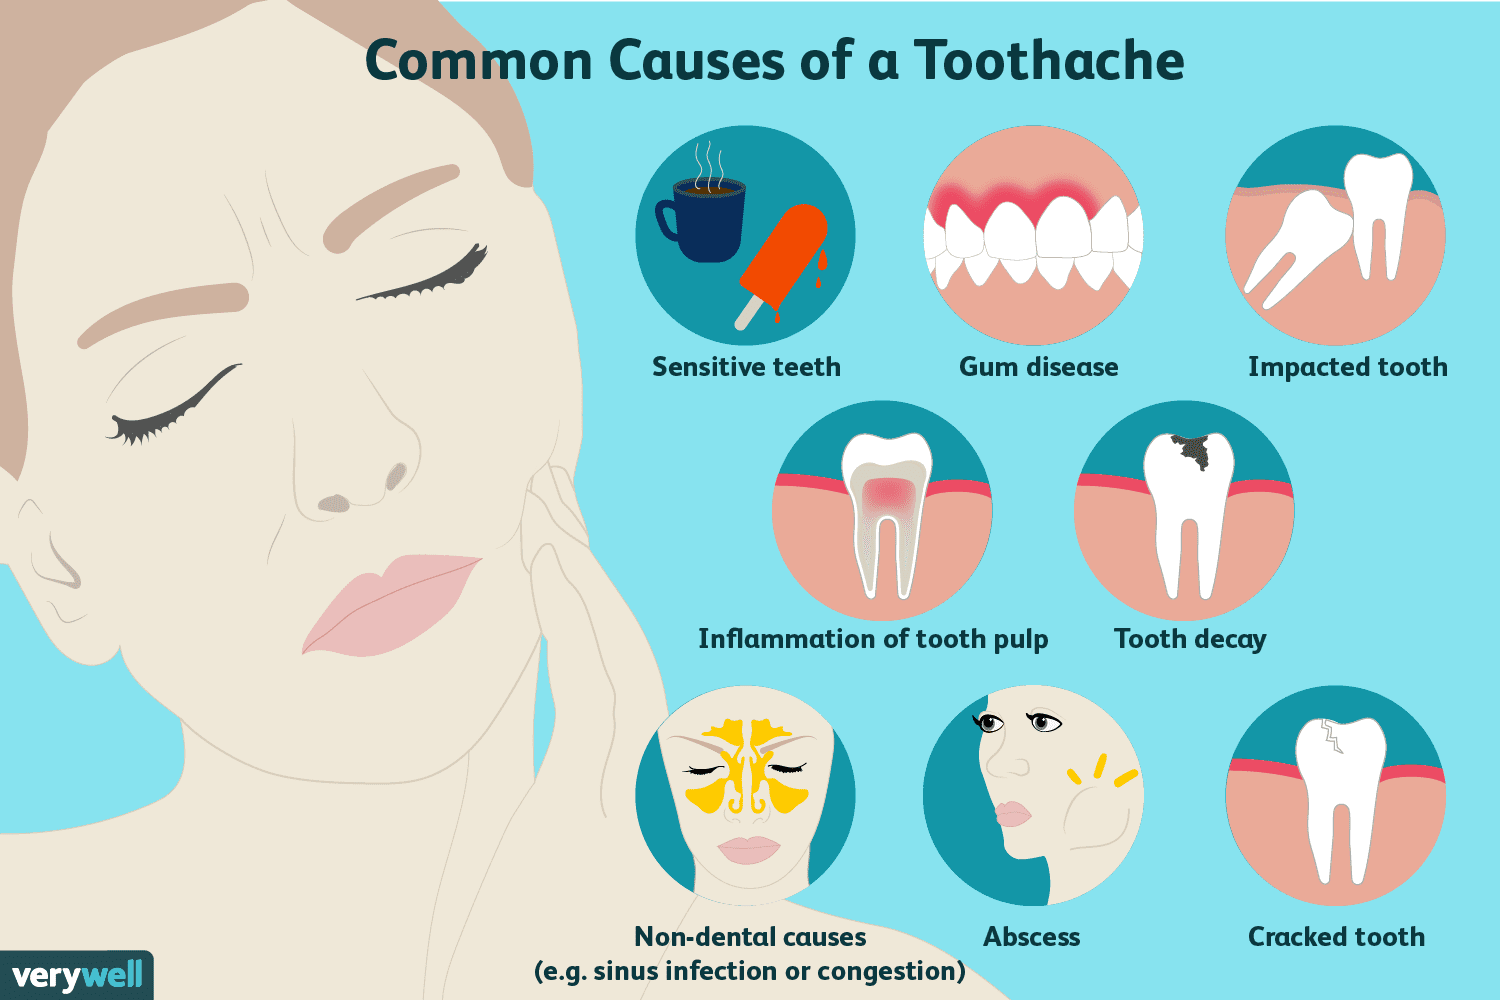 Why am I Experiencing a Toothache and What Can I Do?